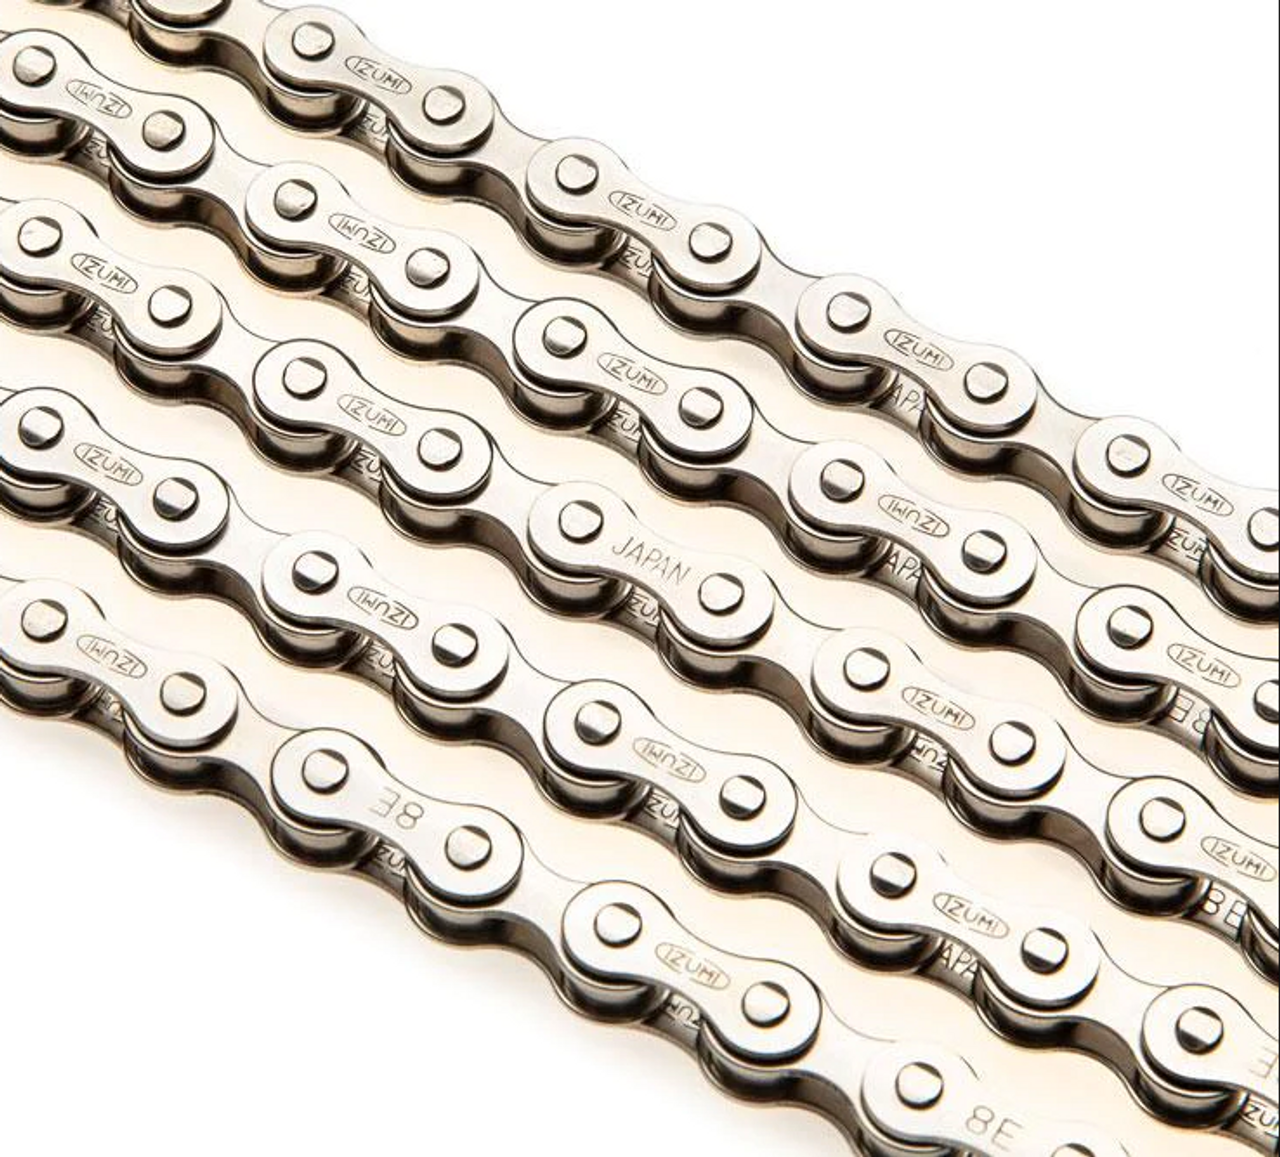 Izumi Single Speed 410 NP 1⁄2” x 1/8” 116 Link Chain In Silver